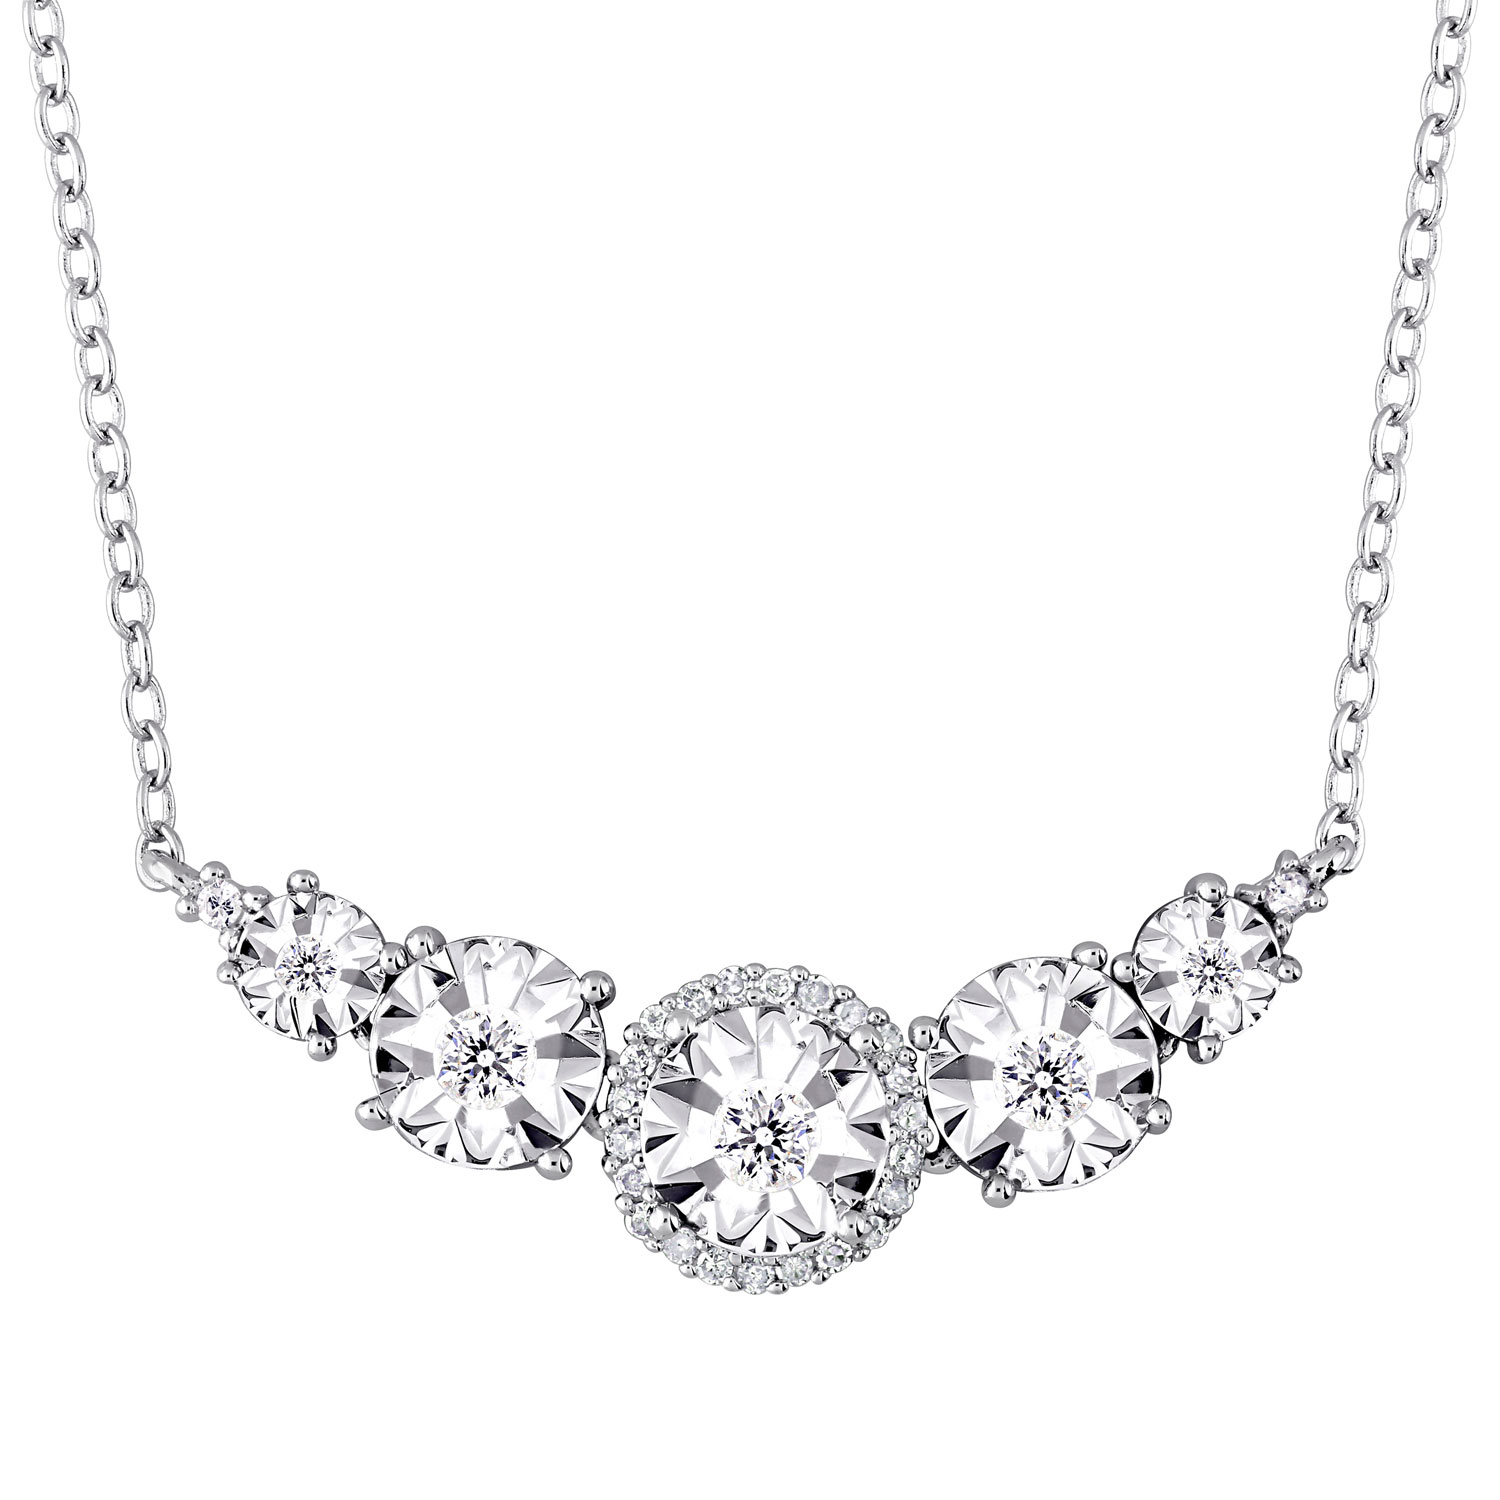 17 inch necklace choose length